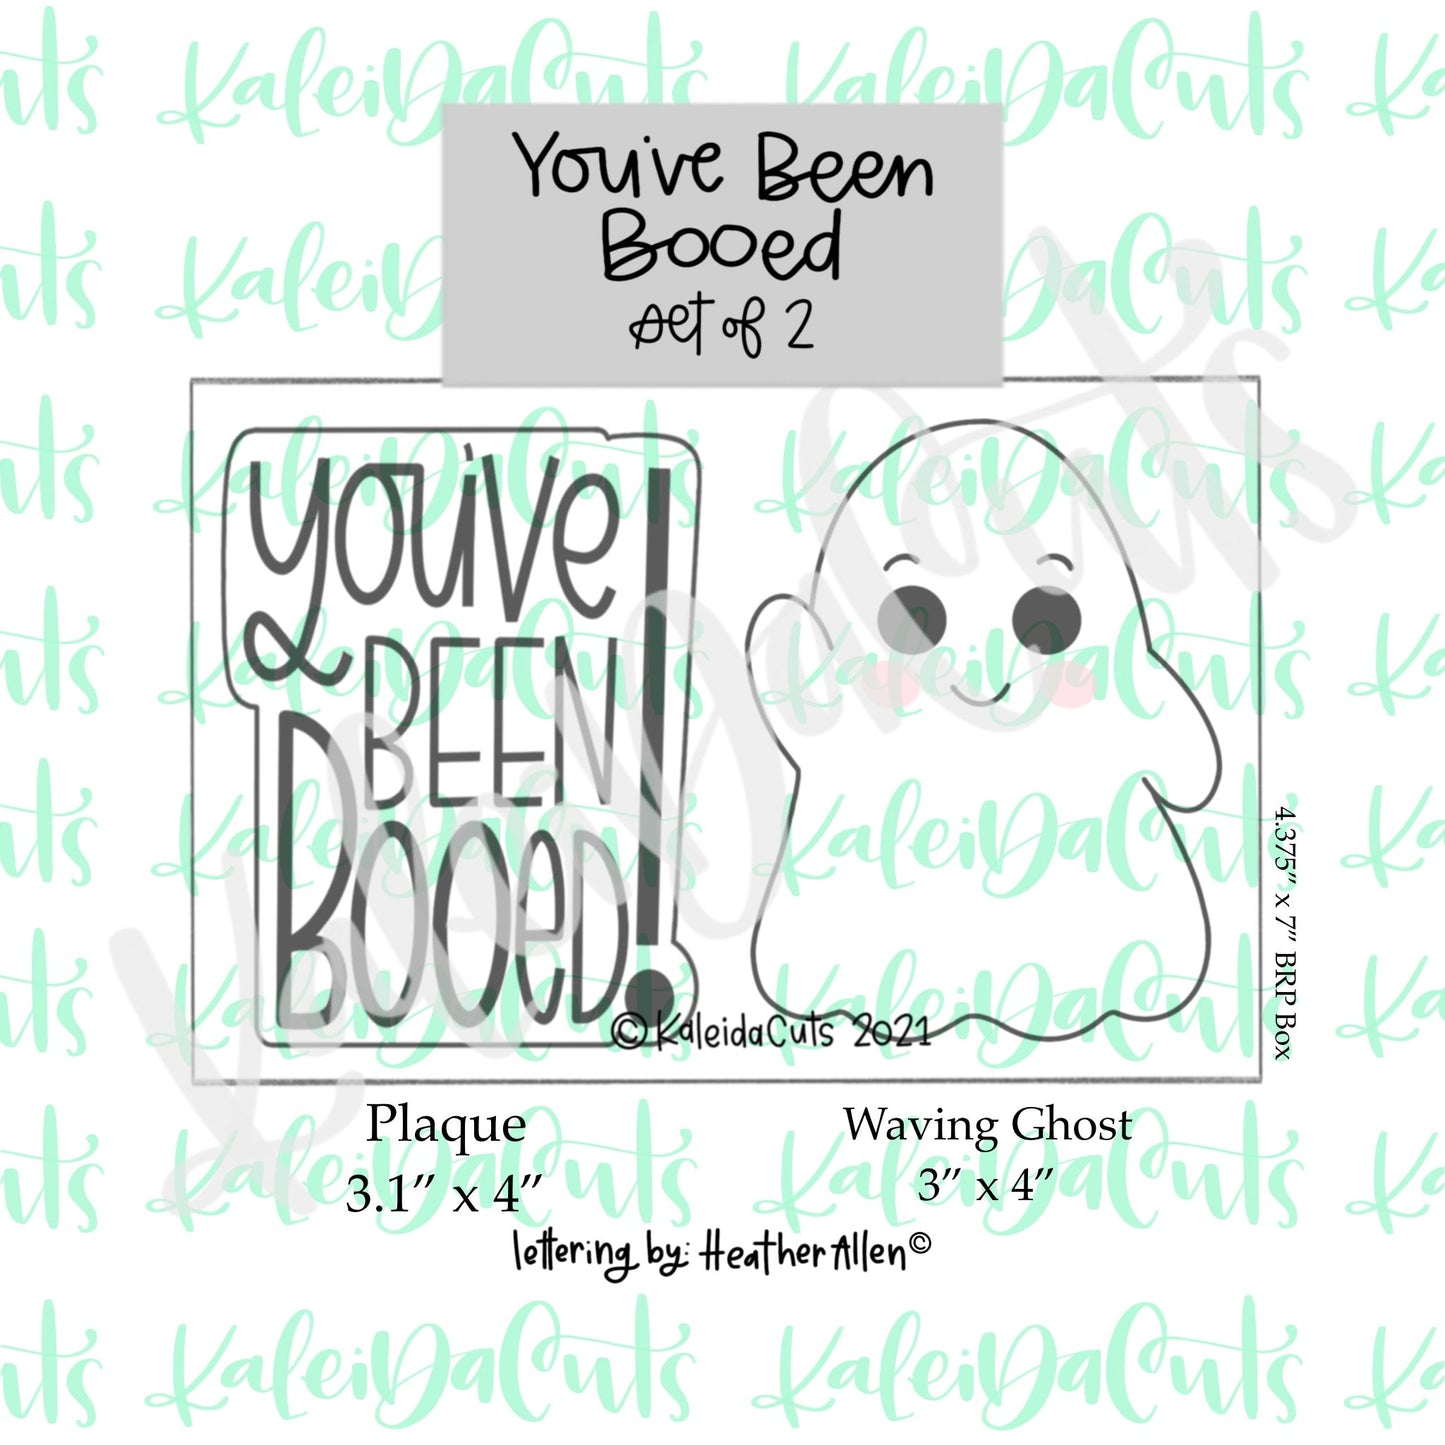 You've Been Booed Set of 2 Cookie Cutters